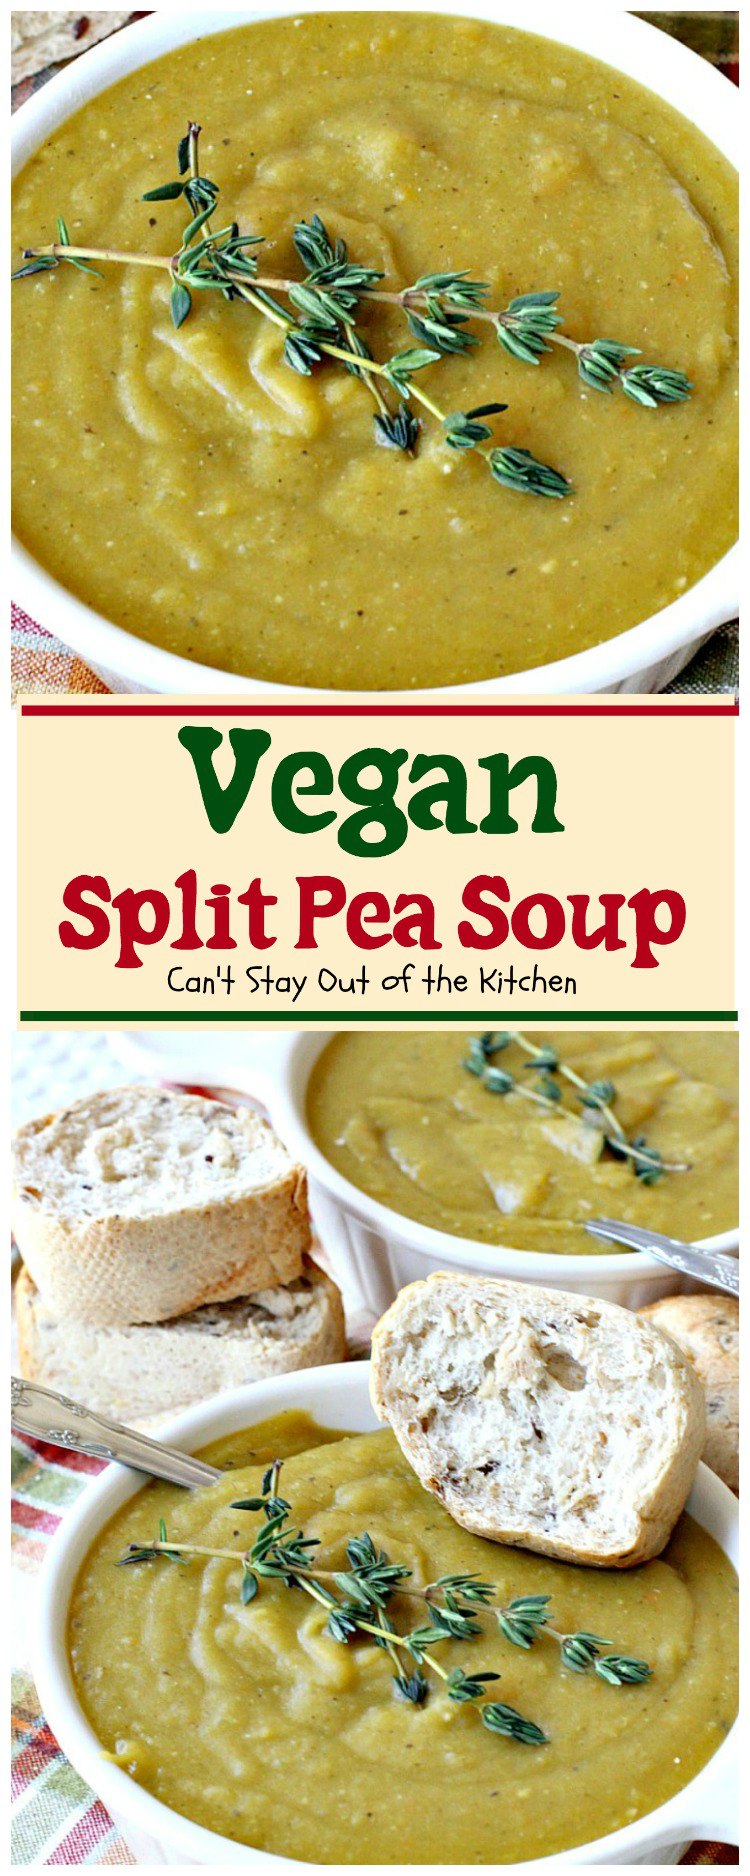 Vegan Split Pea Soup | Can't Stay Out of the Kitchen